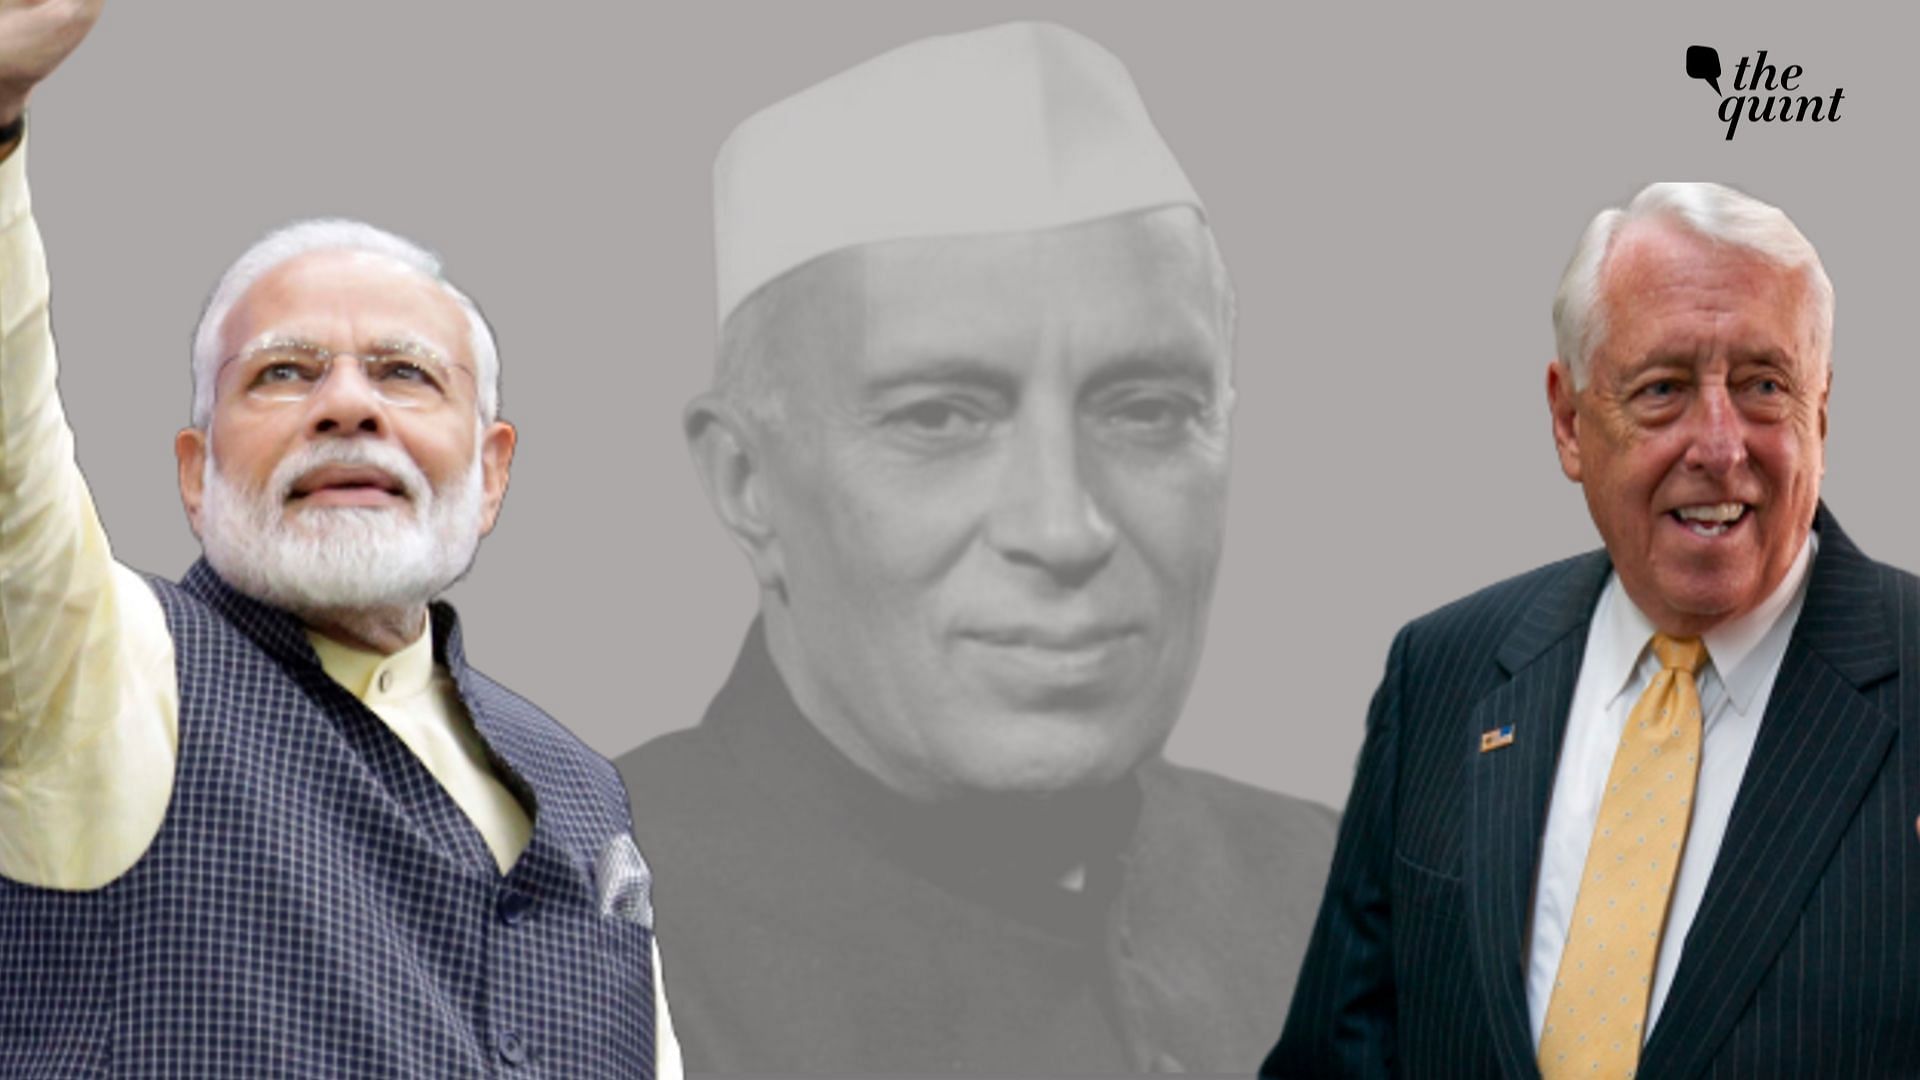 Hoyer, in his address next to Modi, brought up Gandhi’s teachings and even Jawaharlal Nehru’s vision.